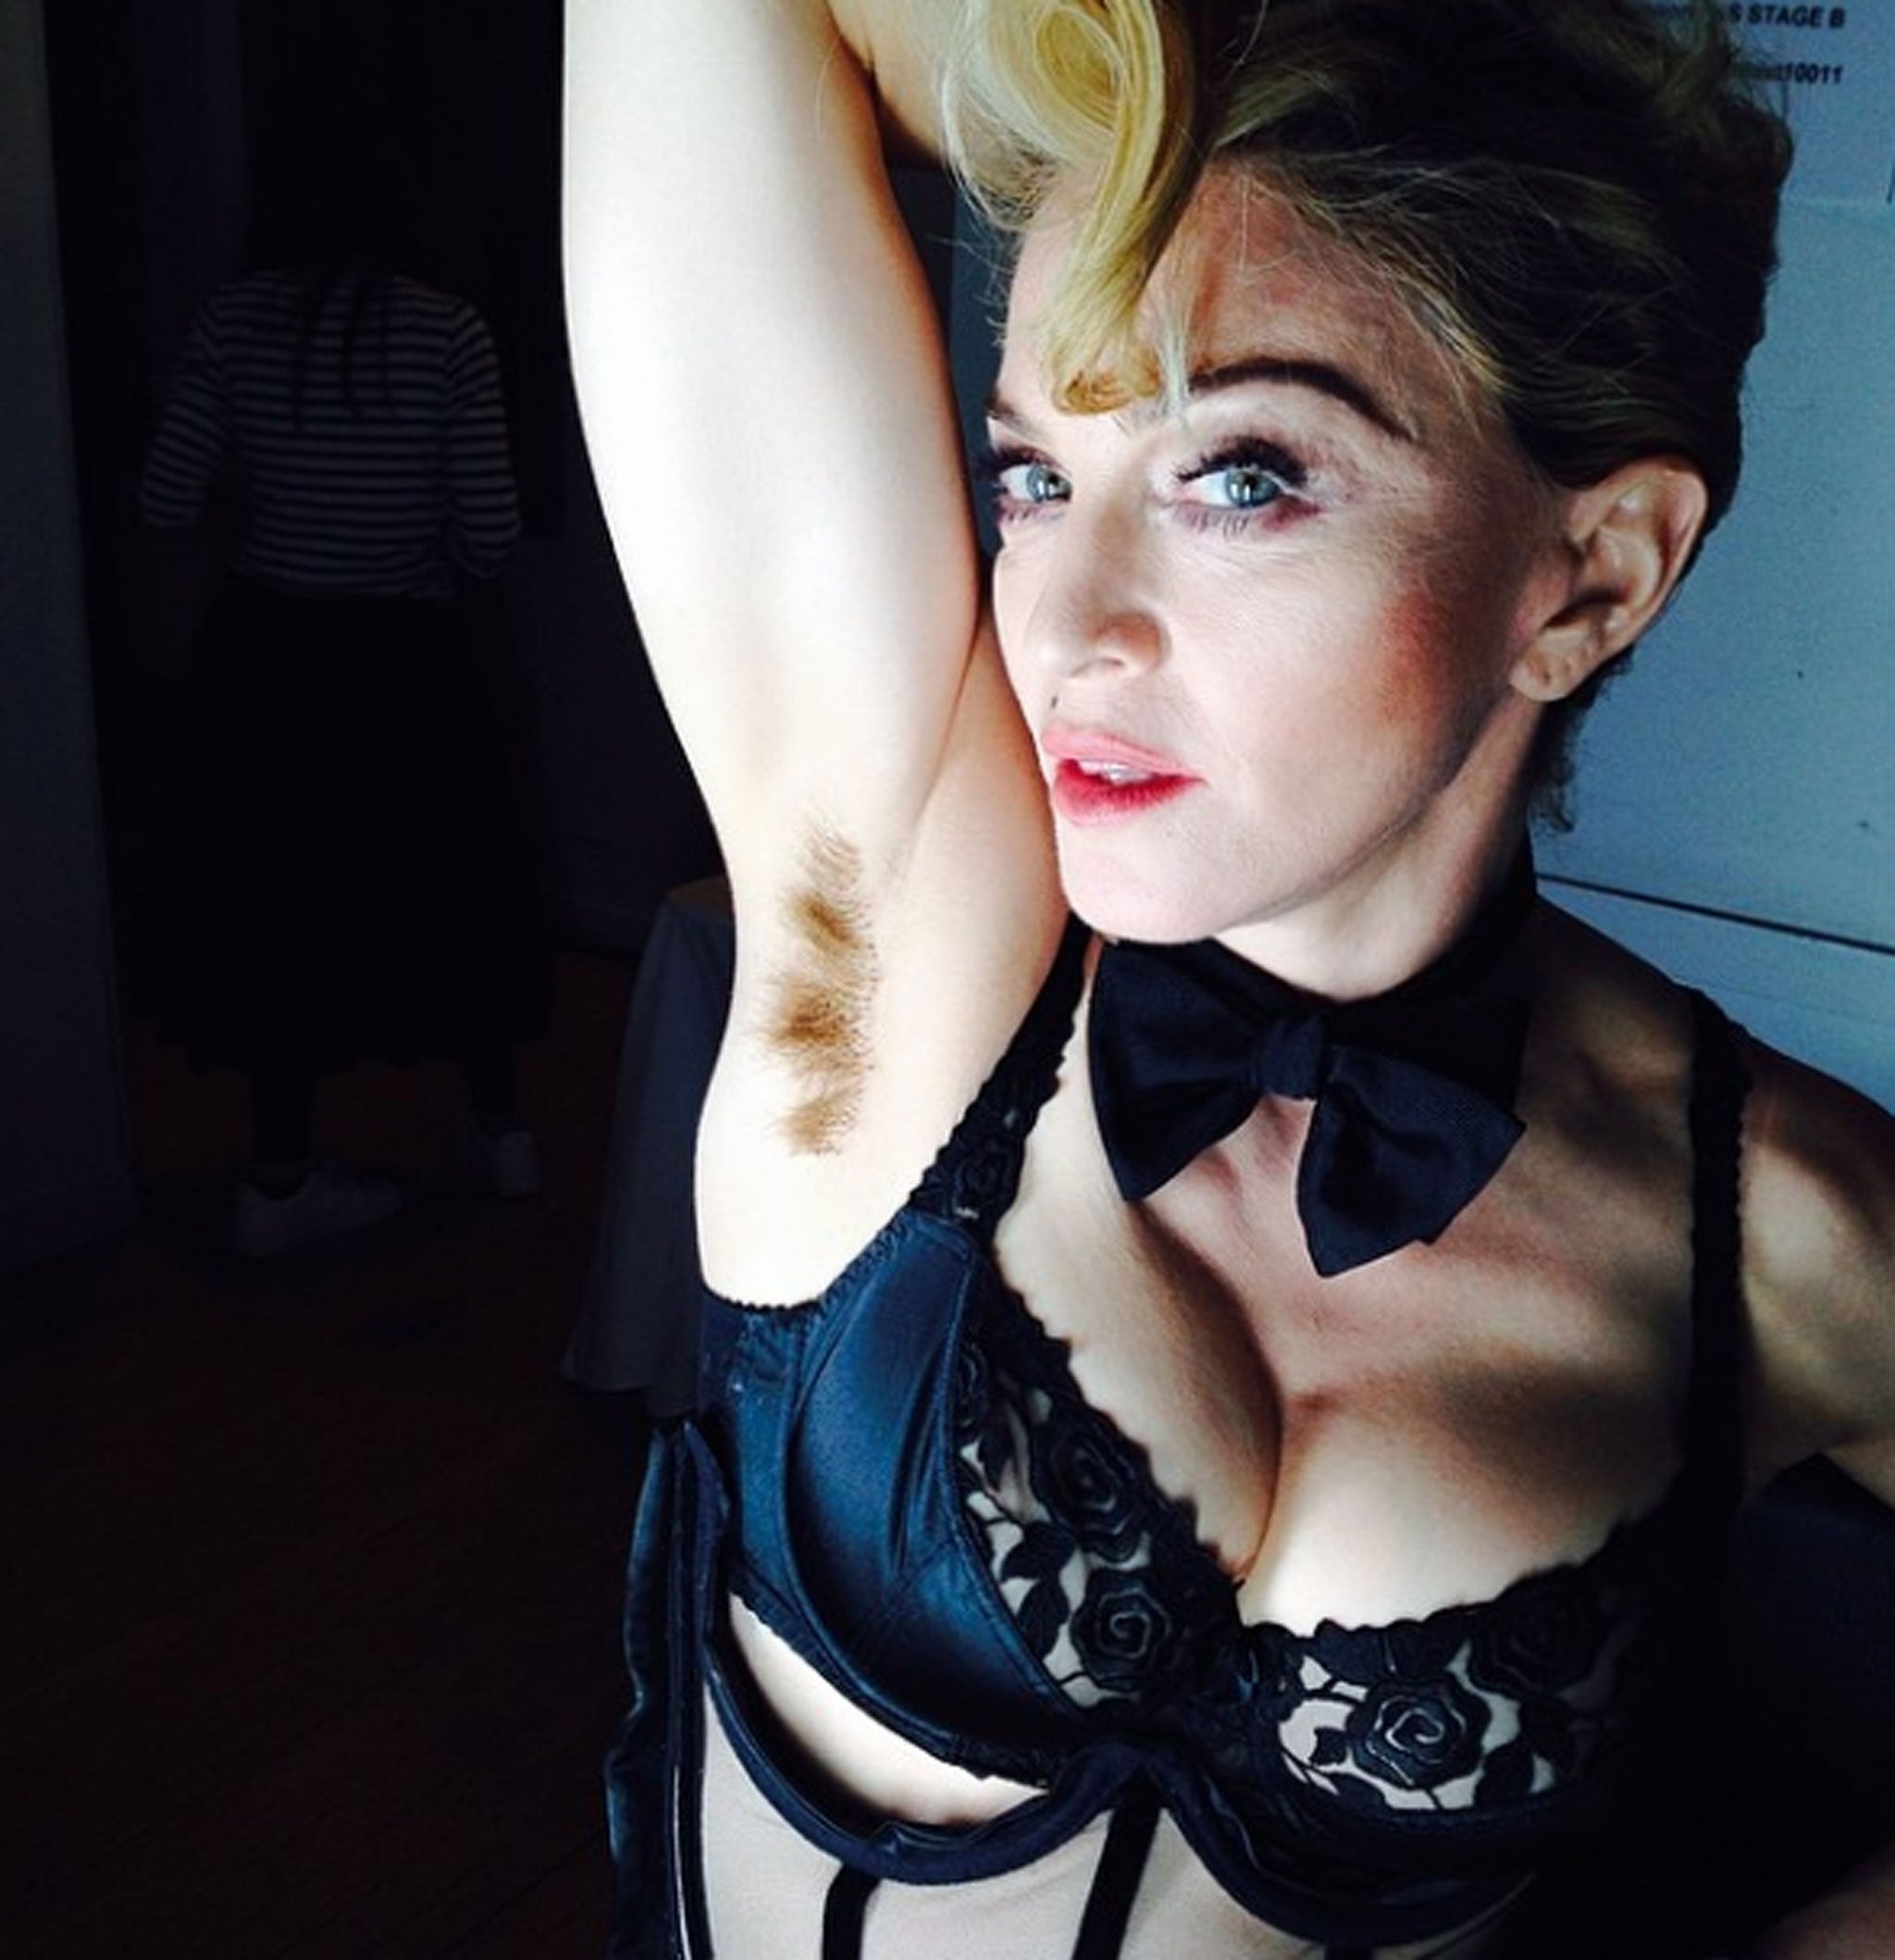 Madonna holds up her right arm to reveal her unshaven armpit